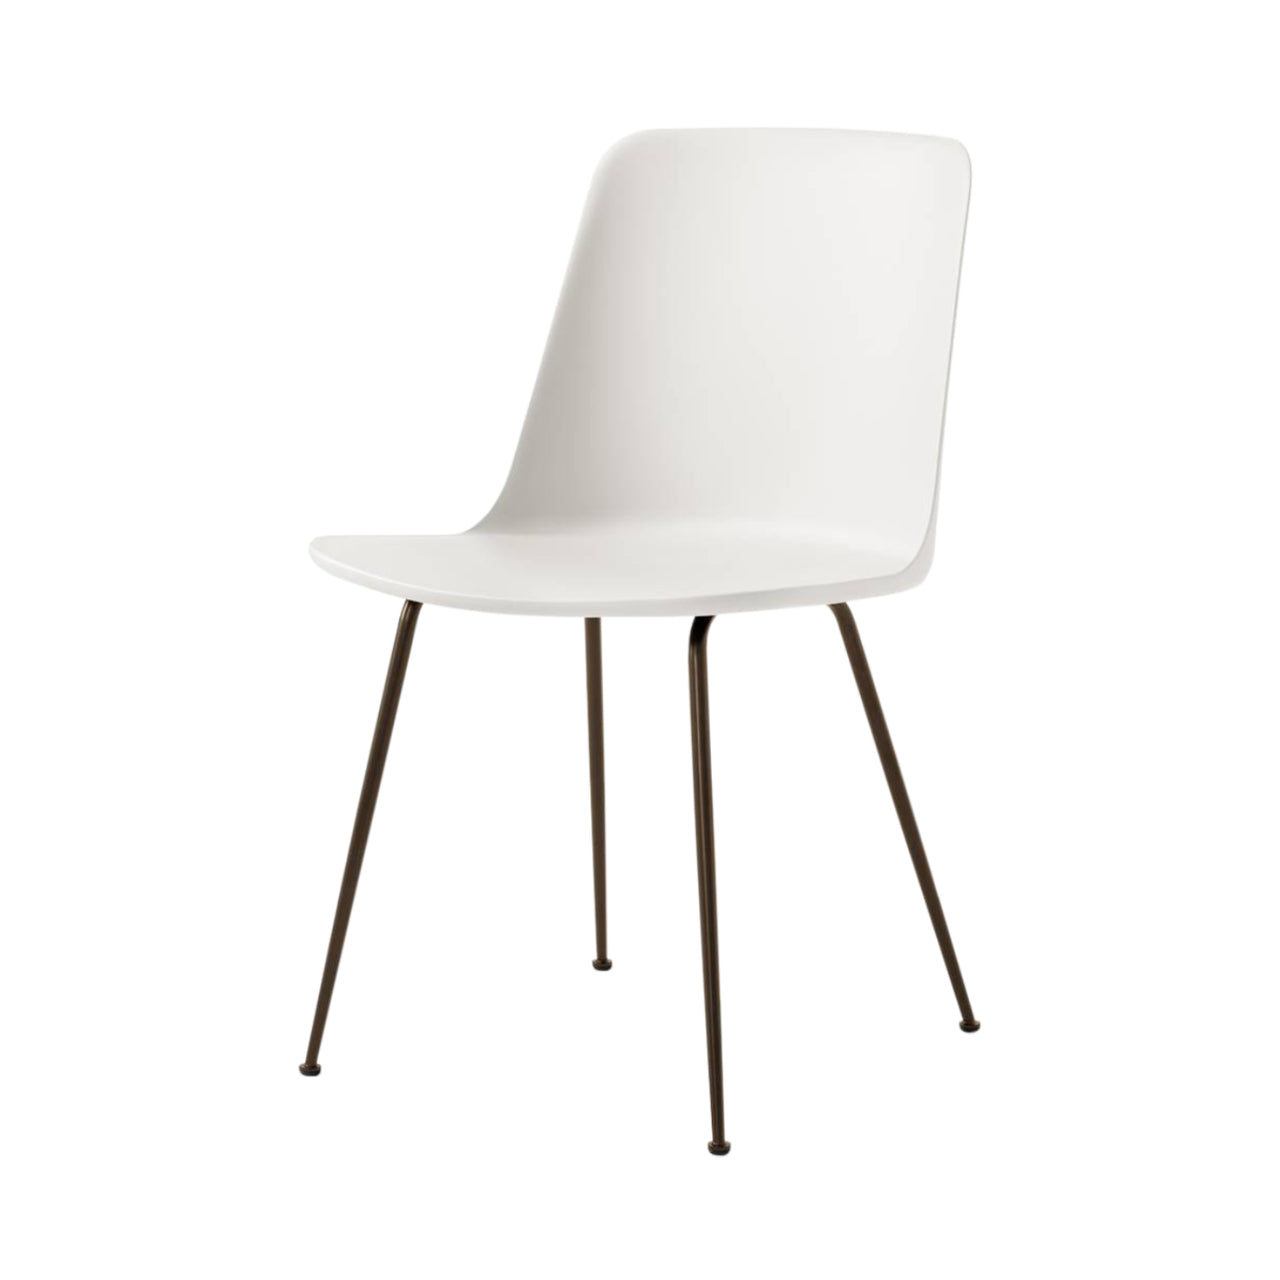 Rely Chair HW6: White + Bronzed